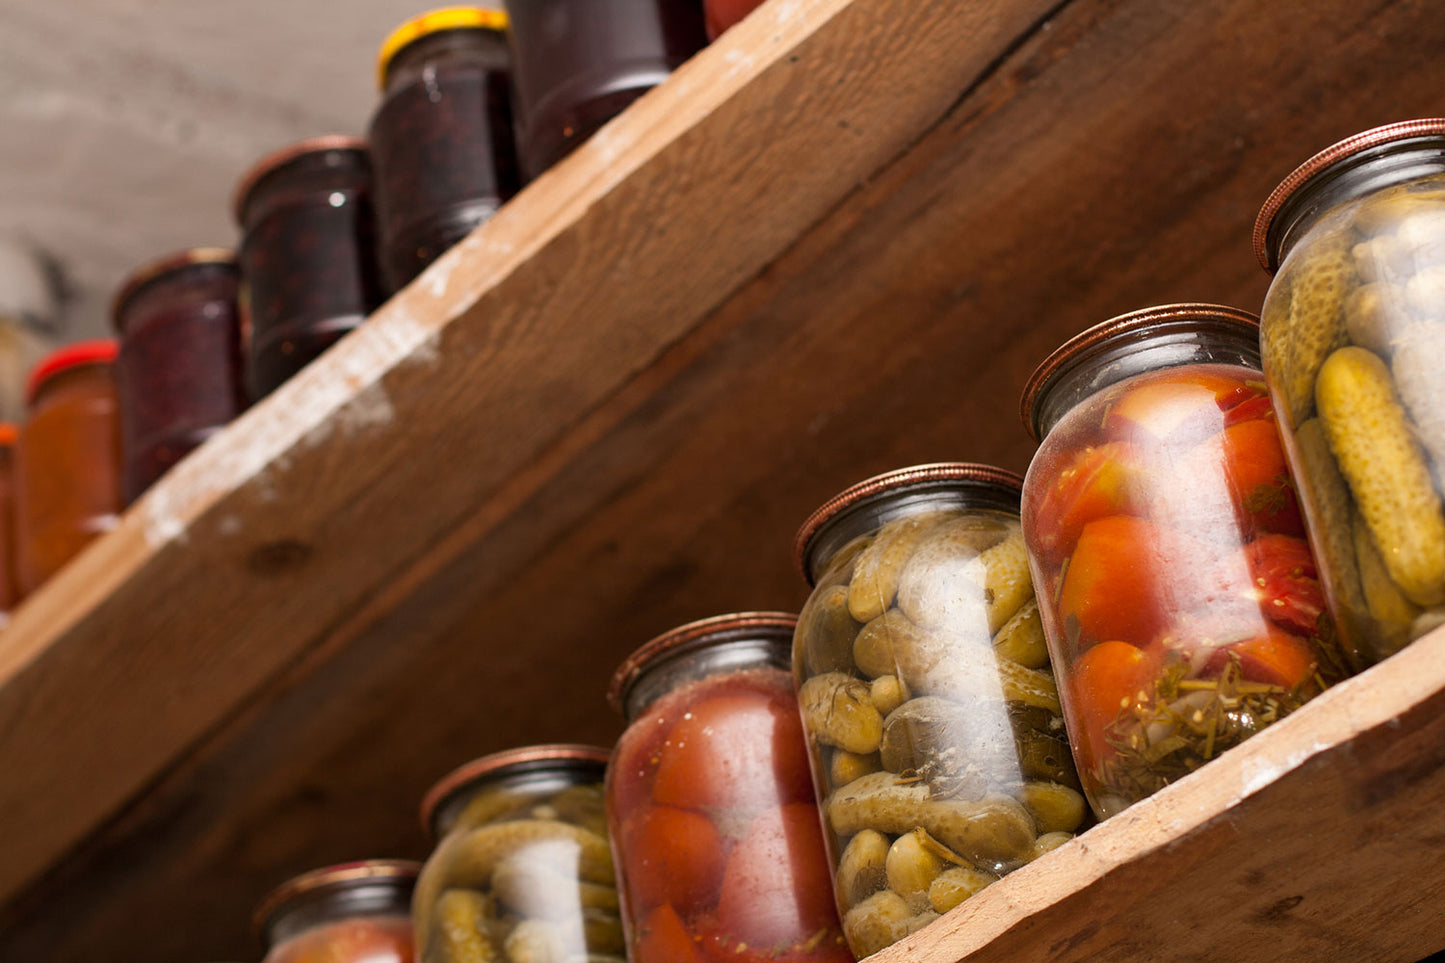 Emergency Food Storage: What You Need to Know to Stay Ready